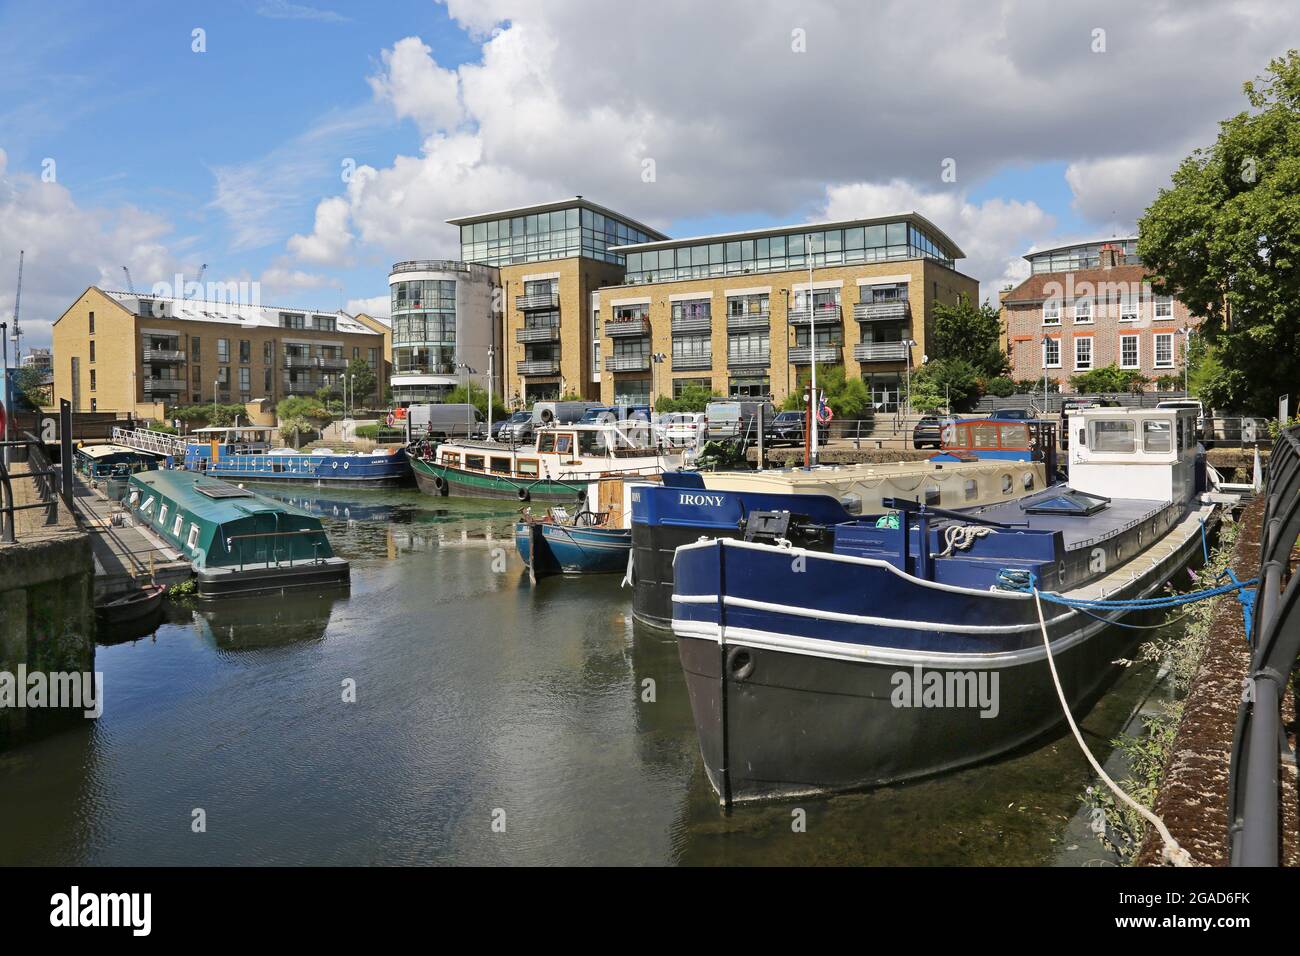 Houseboats and barges moored at a redeveloped Dock on the River Thames at Brentford, west London, UK. New cafes and apartments in background. Stock Photo